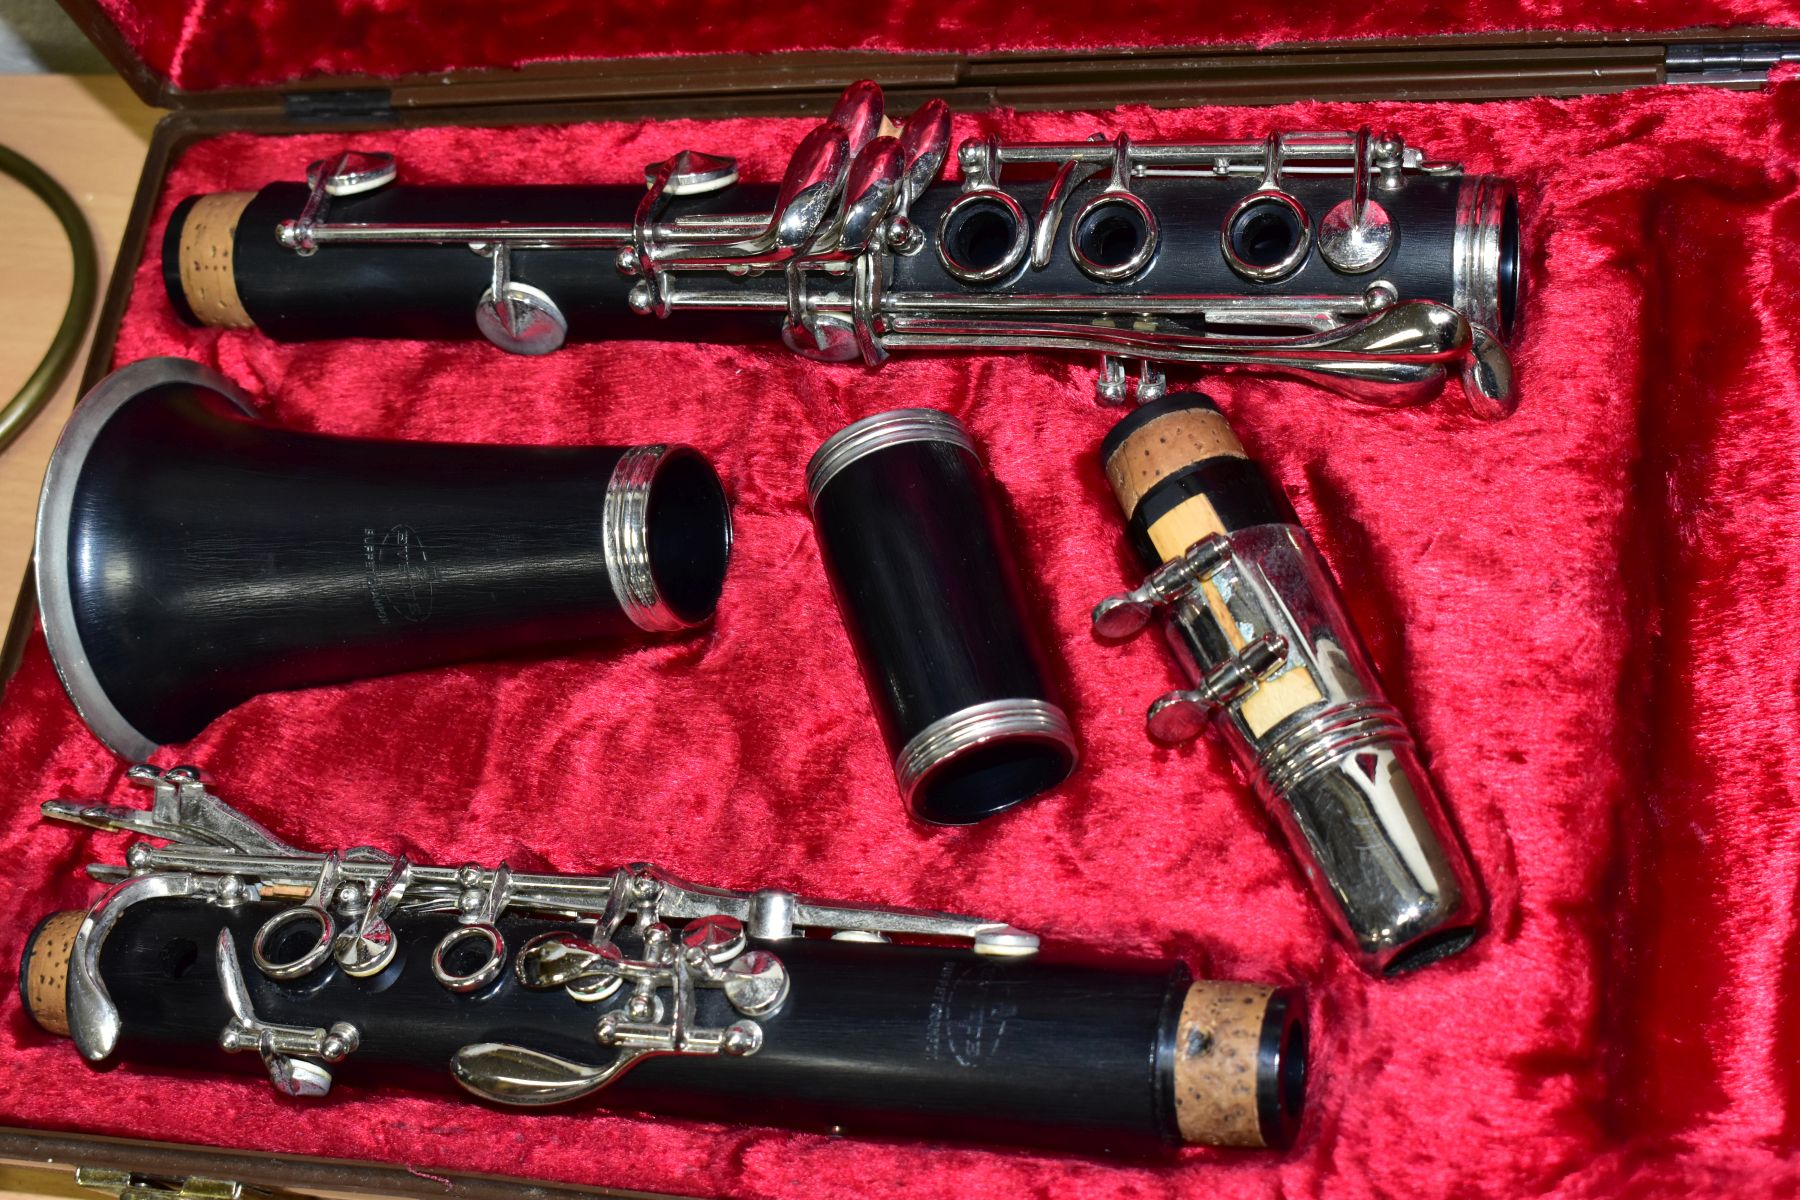 A CASED BUFFET CRAMPON EVETTE EBONITE CLARINET, serial number 177079, (missing reeds in case) ( - Image 4 of 5